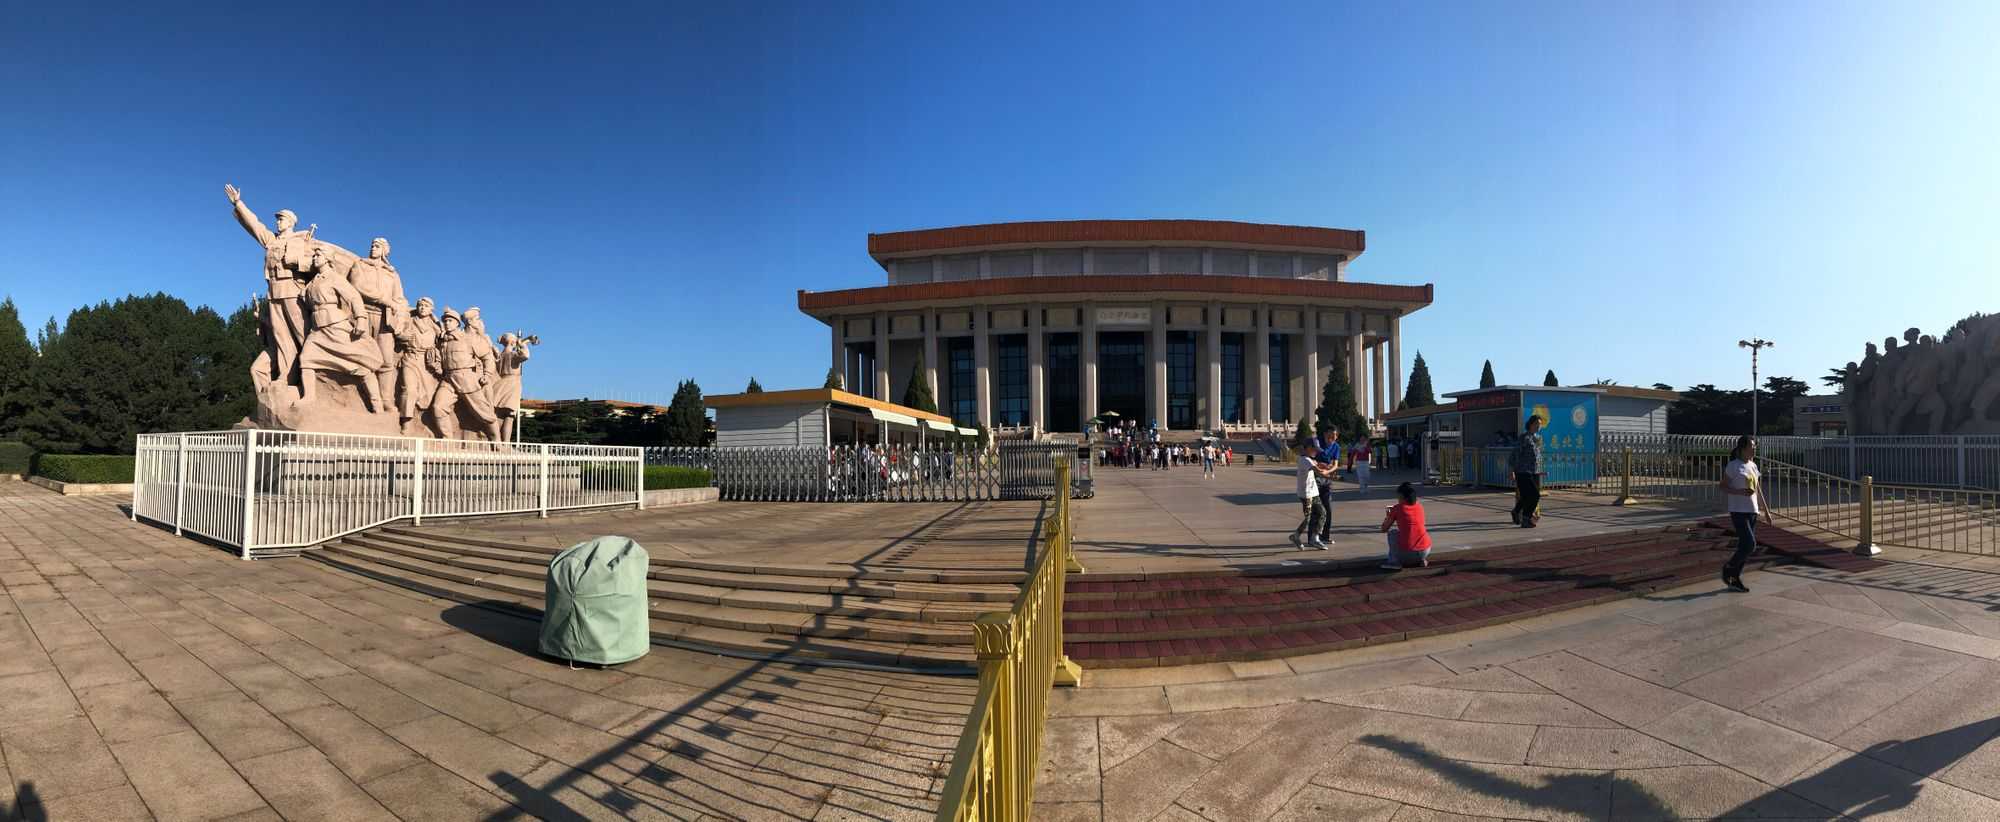 Mausoleum of Mao Zedong (Image by author)